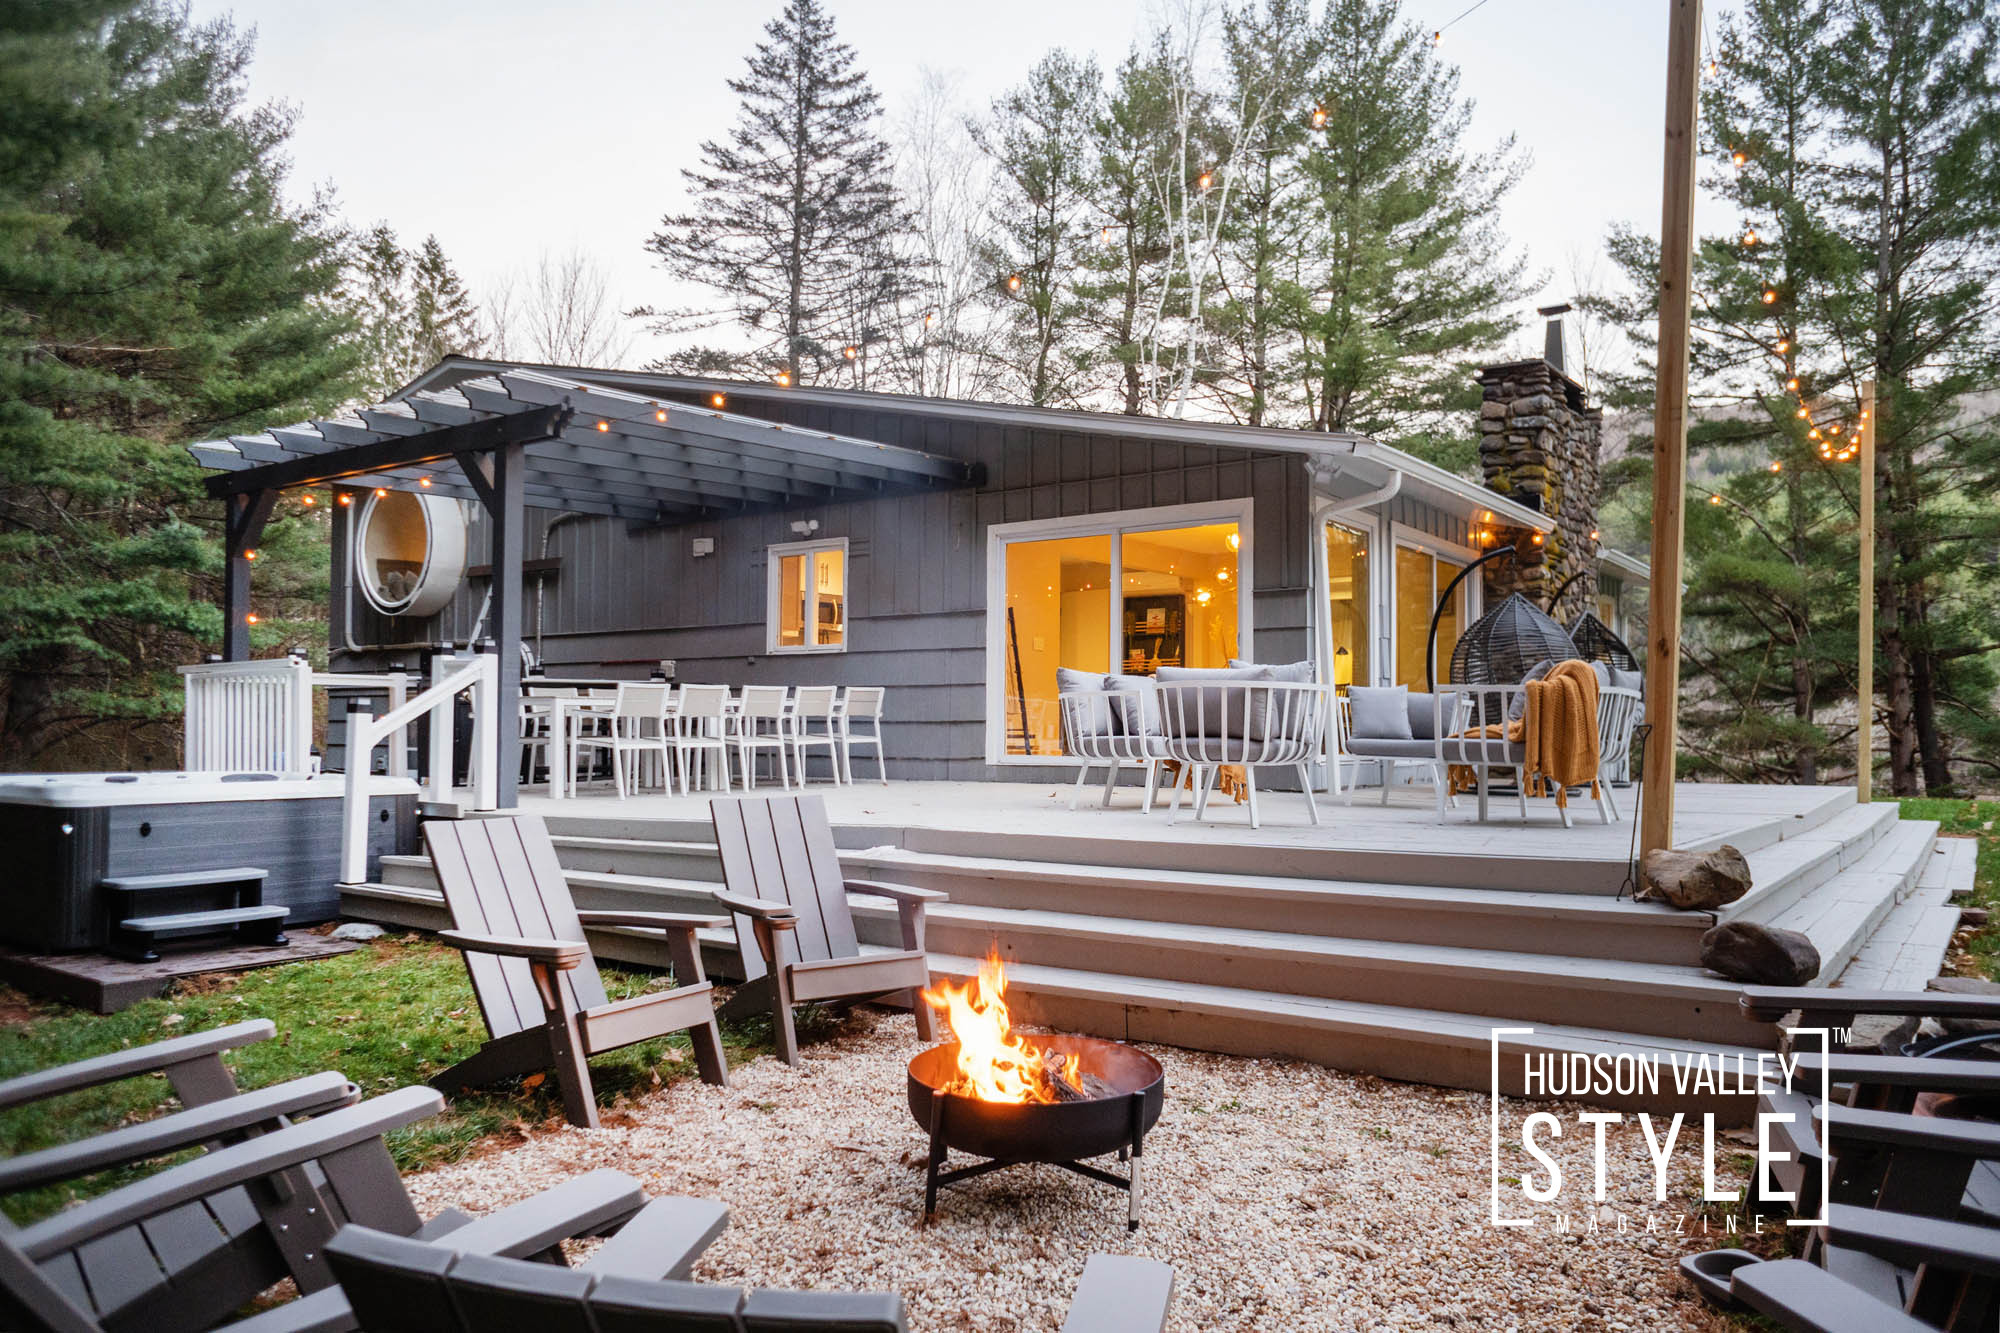 How to Find the Best Airbnb Photographer in Upstate, NY – Presented by Alluvion Media